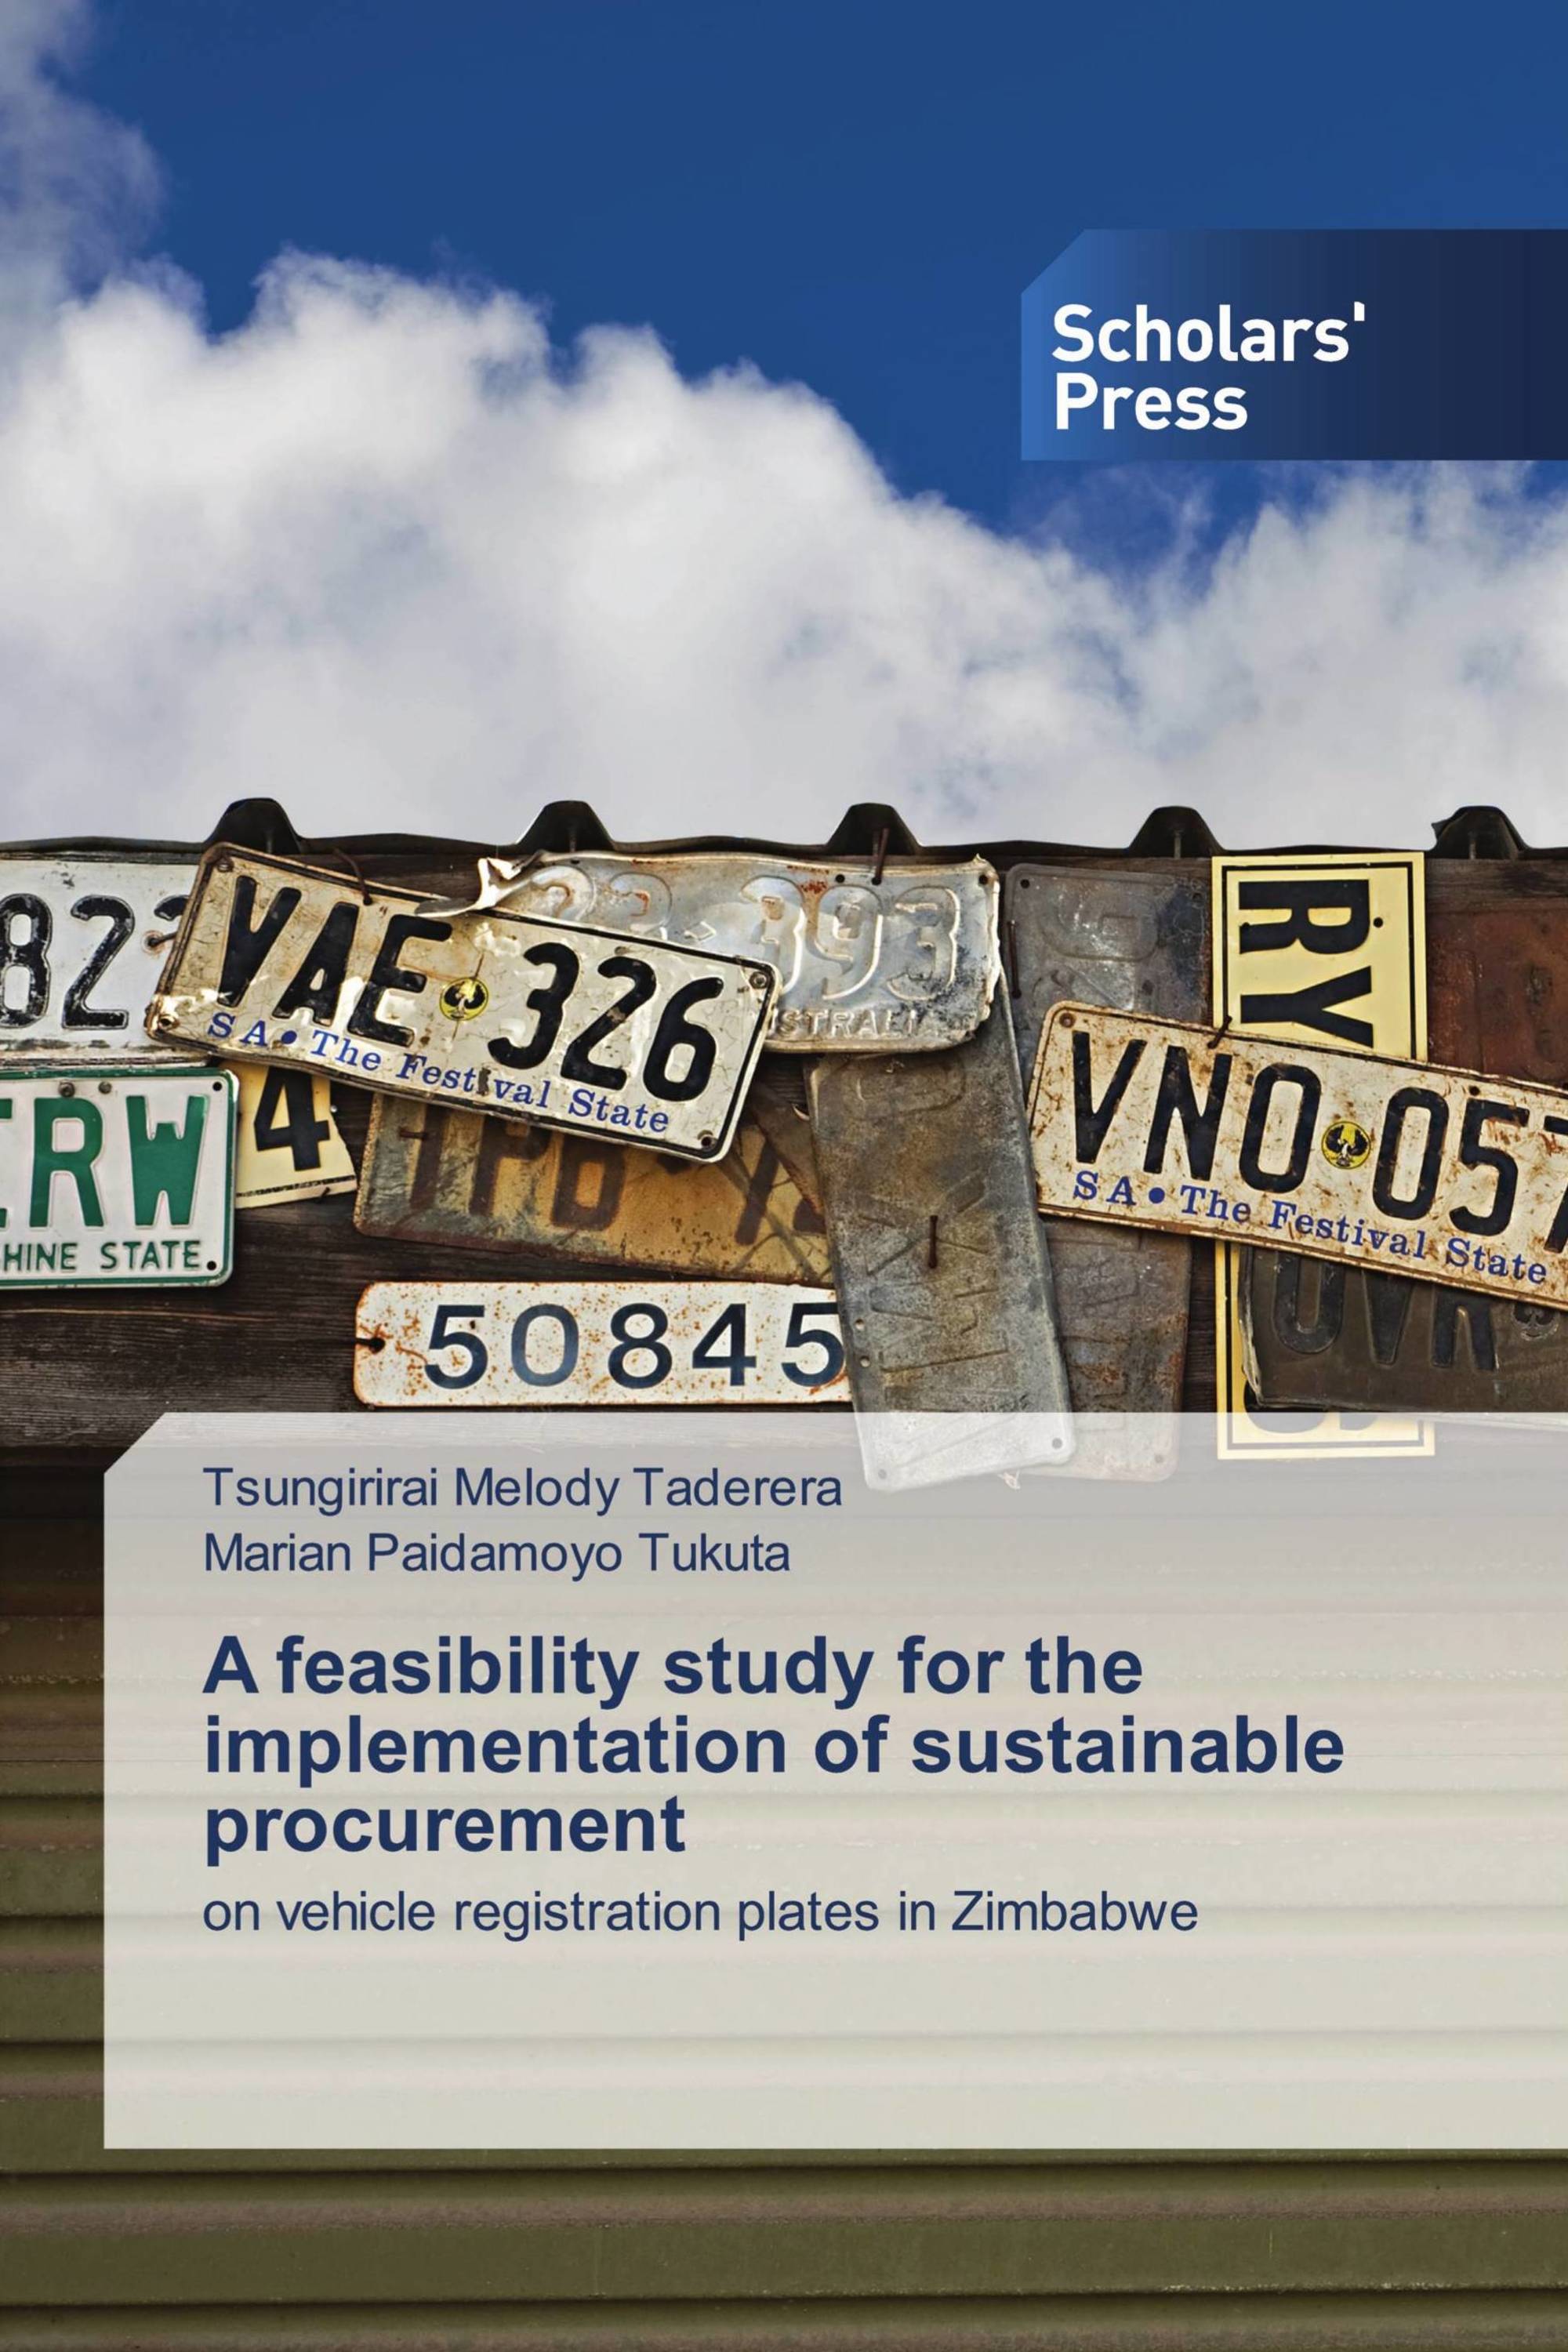 A feasibility study for the implementation of sustainable procurement